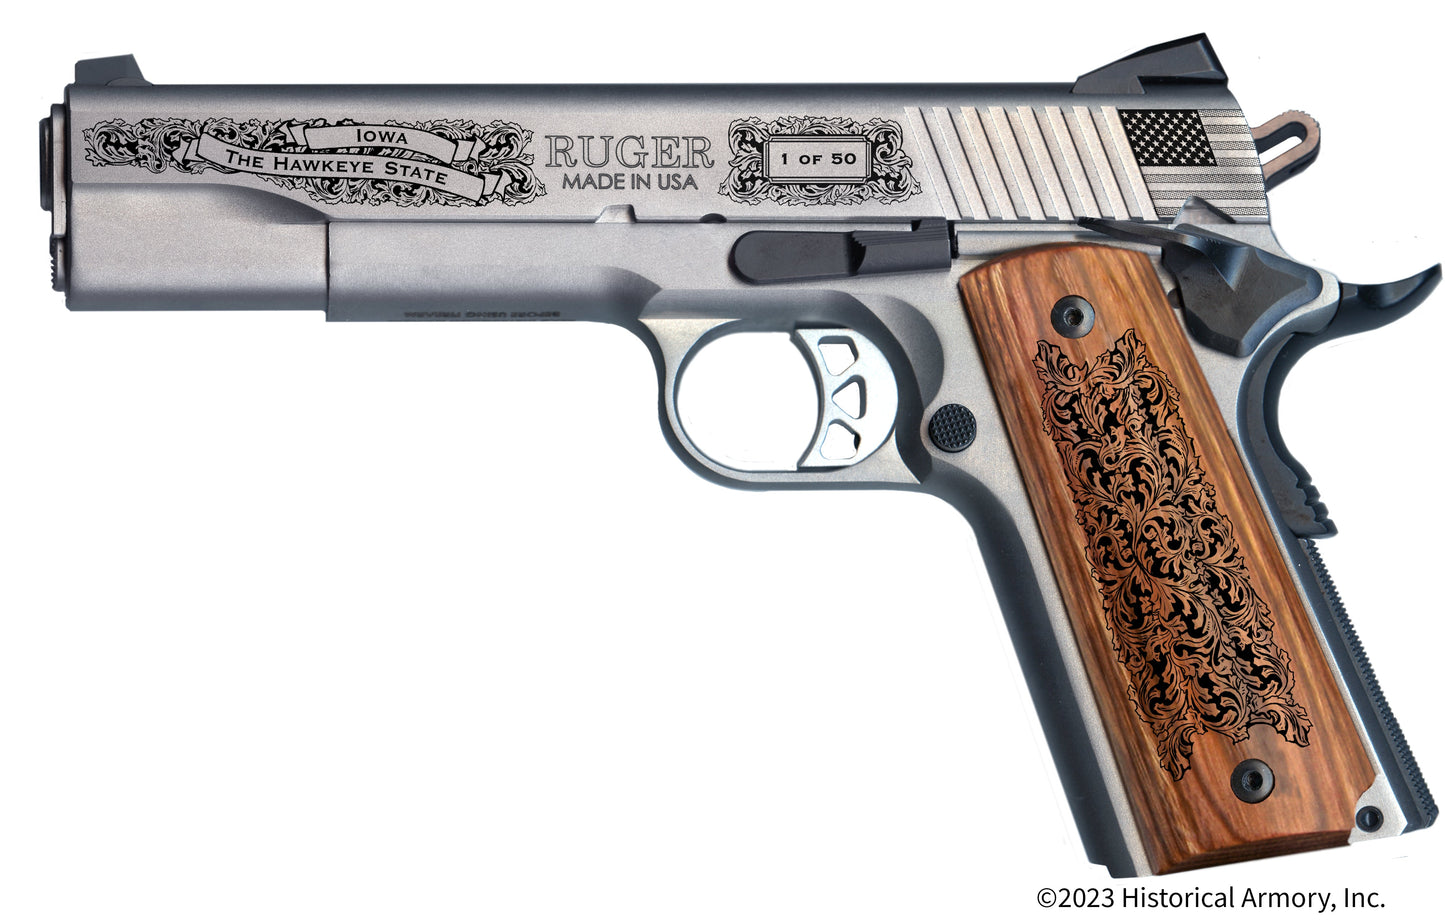 Jefferson County Iowa Engraved .45 Auto Ruger 1911